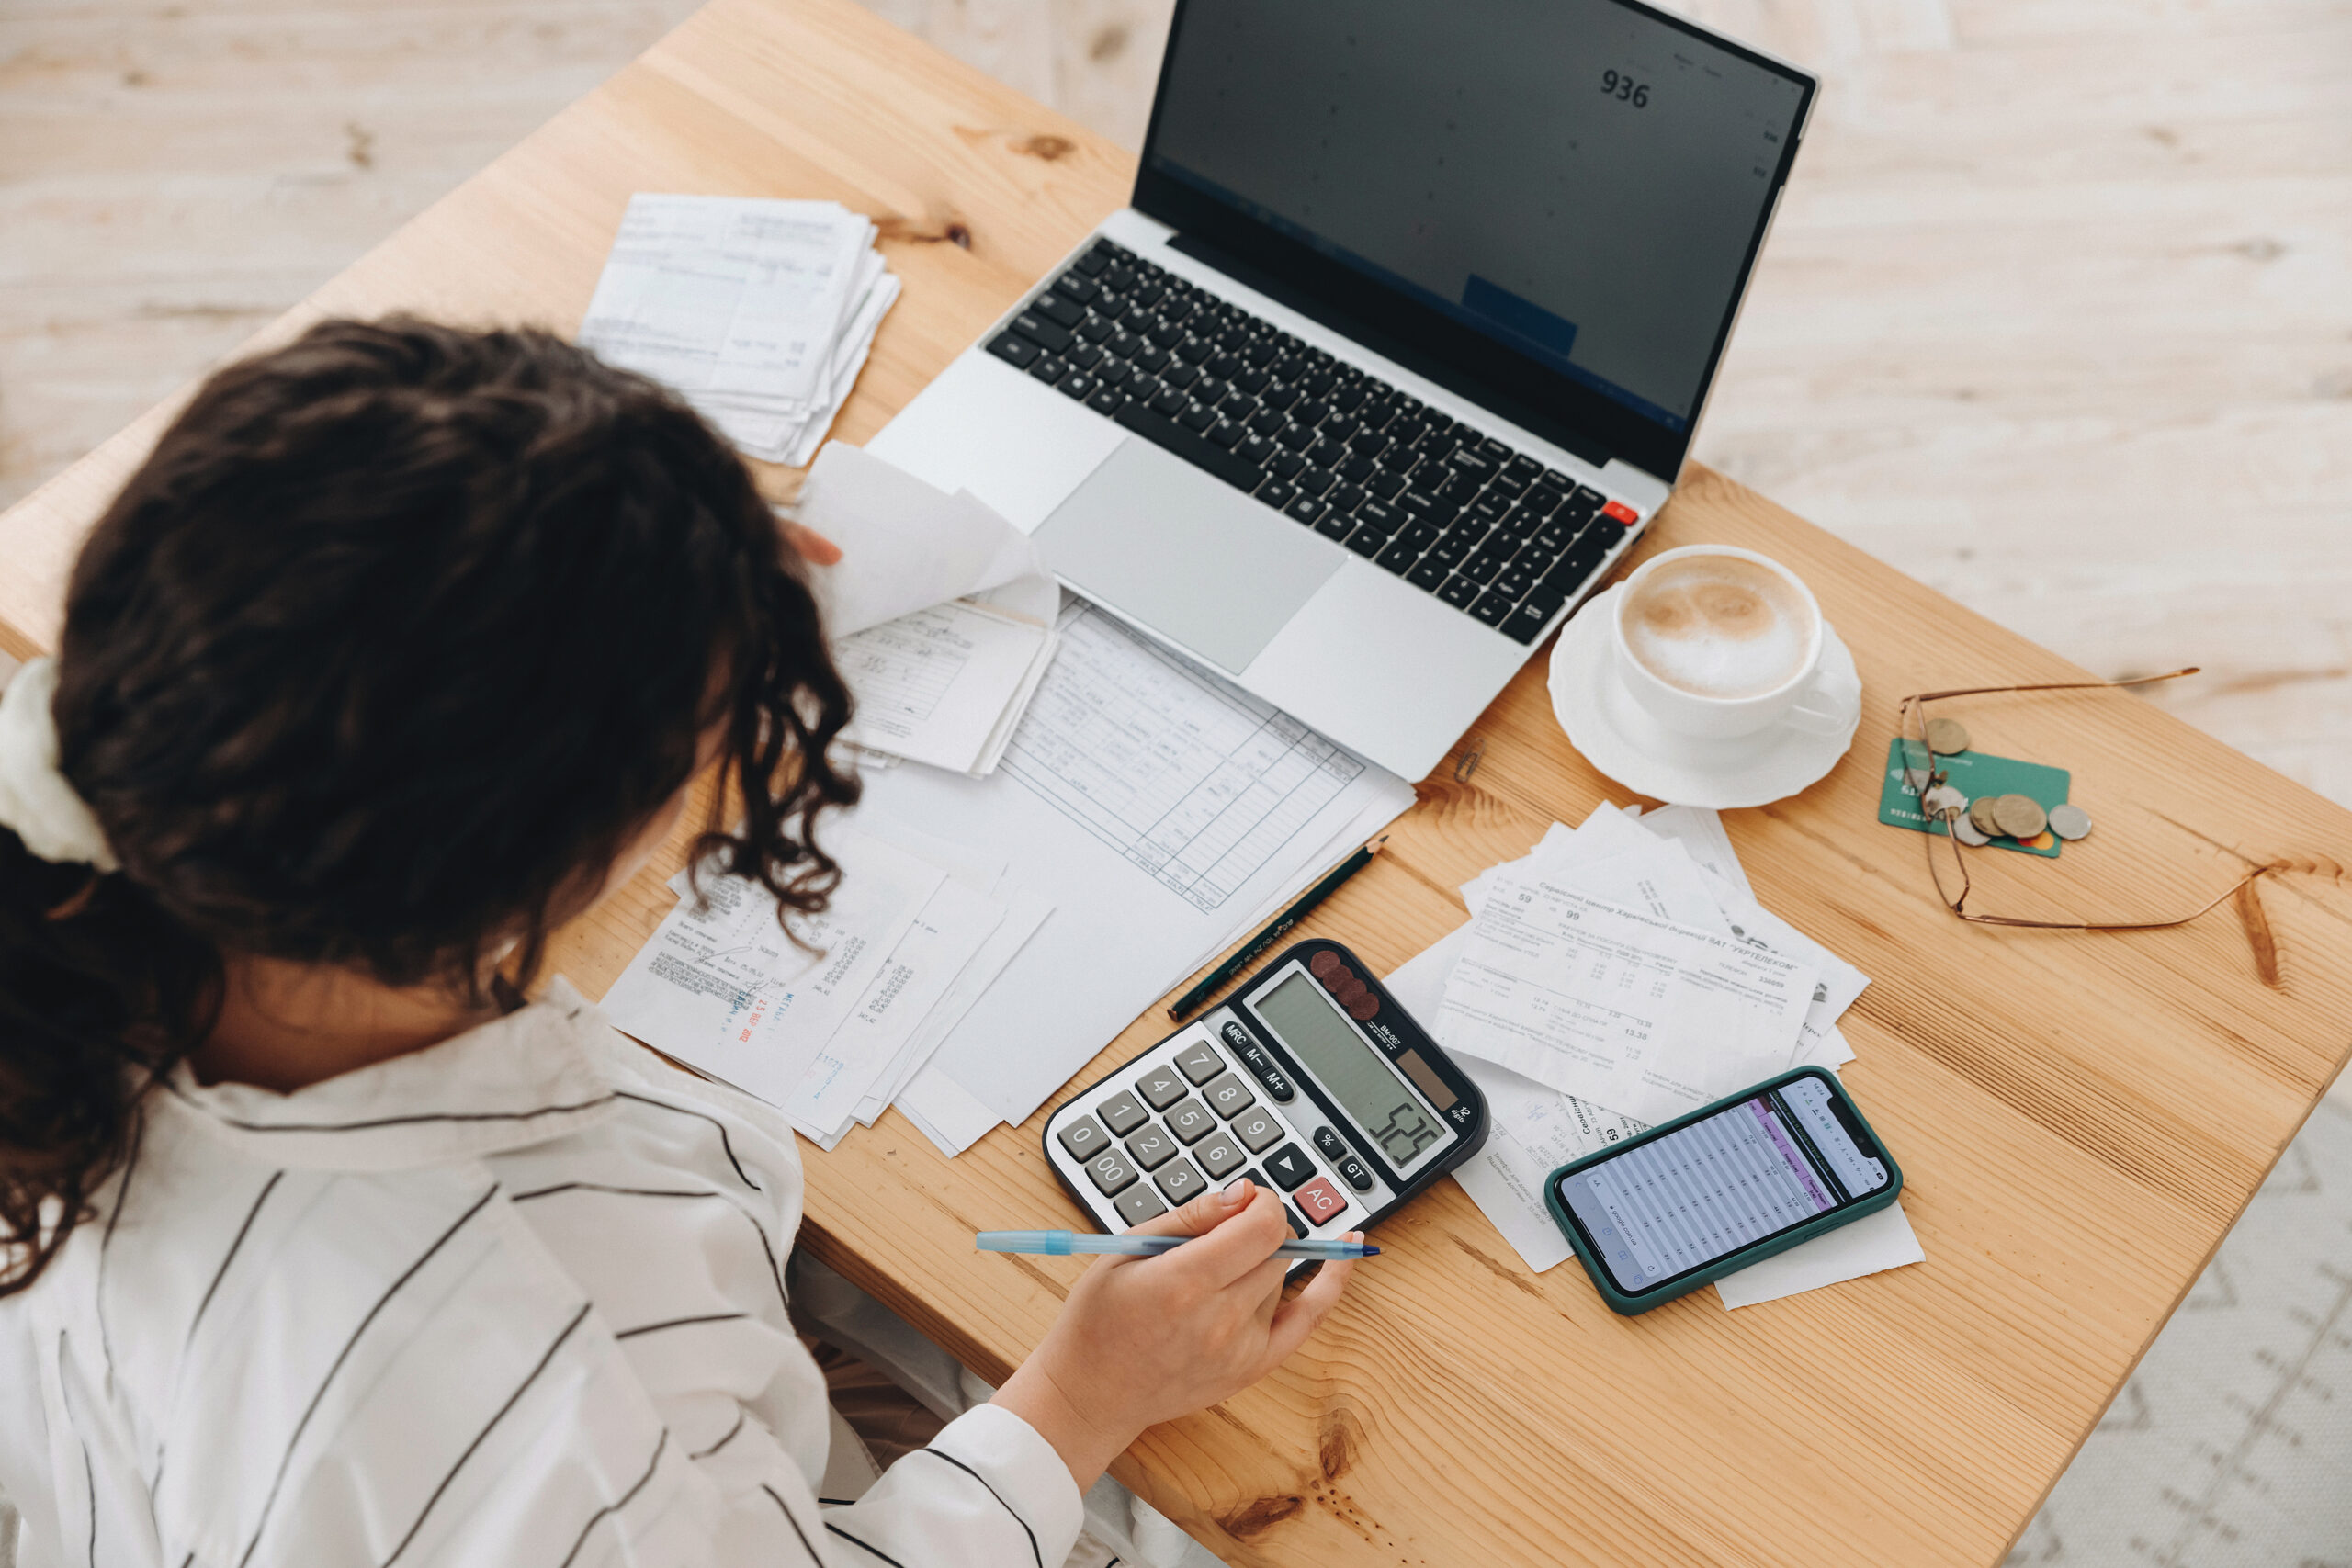 Top view of a woman working at home in the kitchen with financial papers, counting on a calculator, paying bills, planning a budget to save some money. Independent accounting, remote accountant